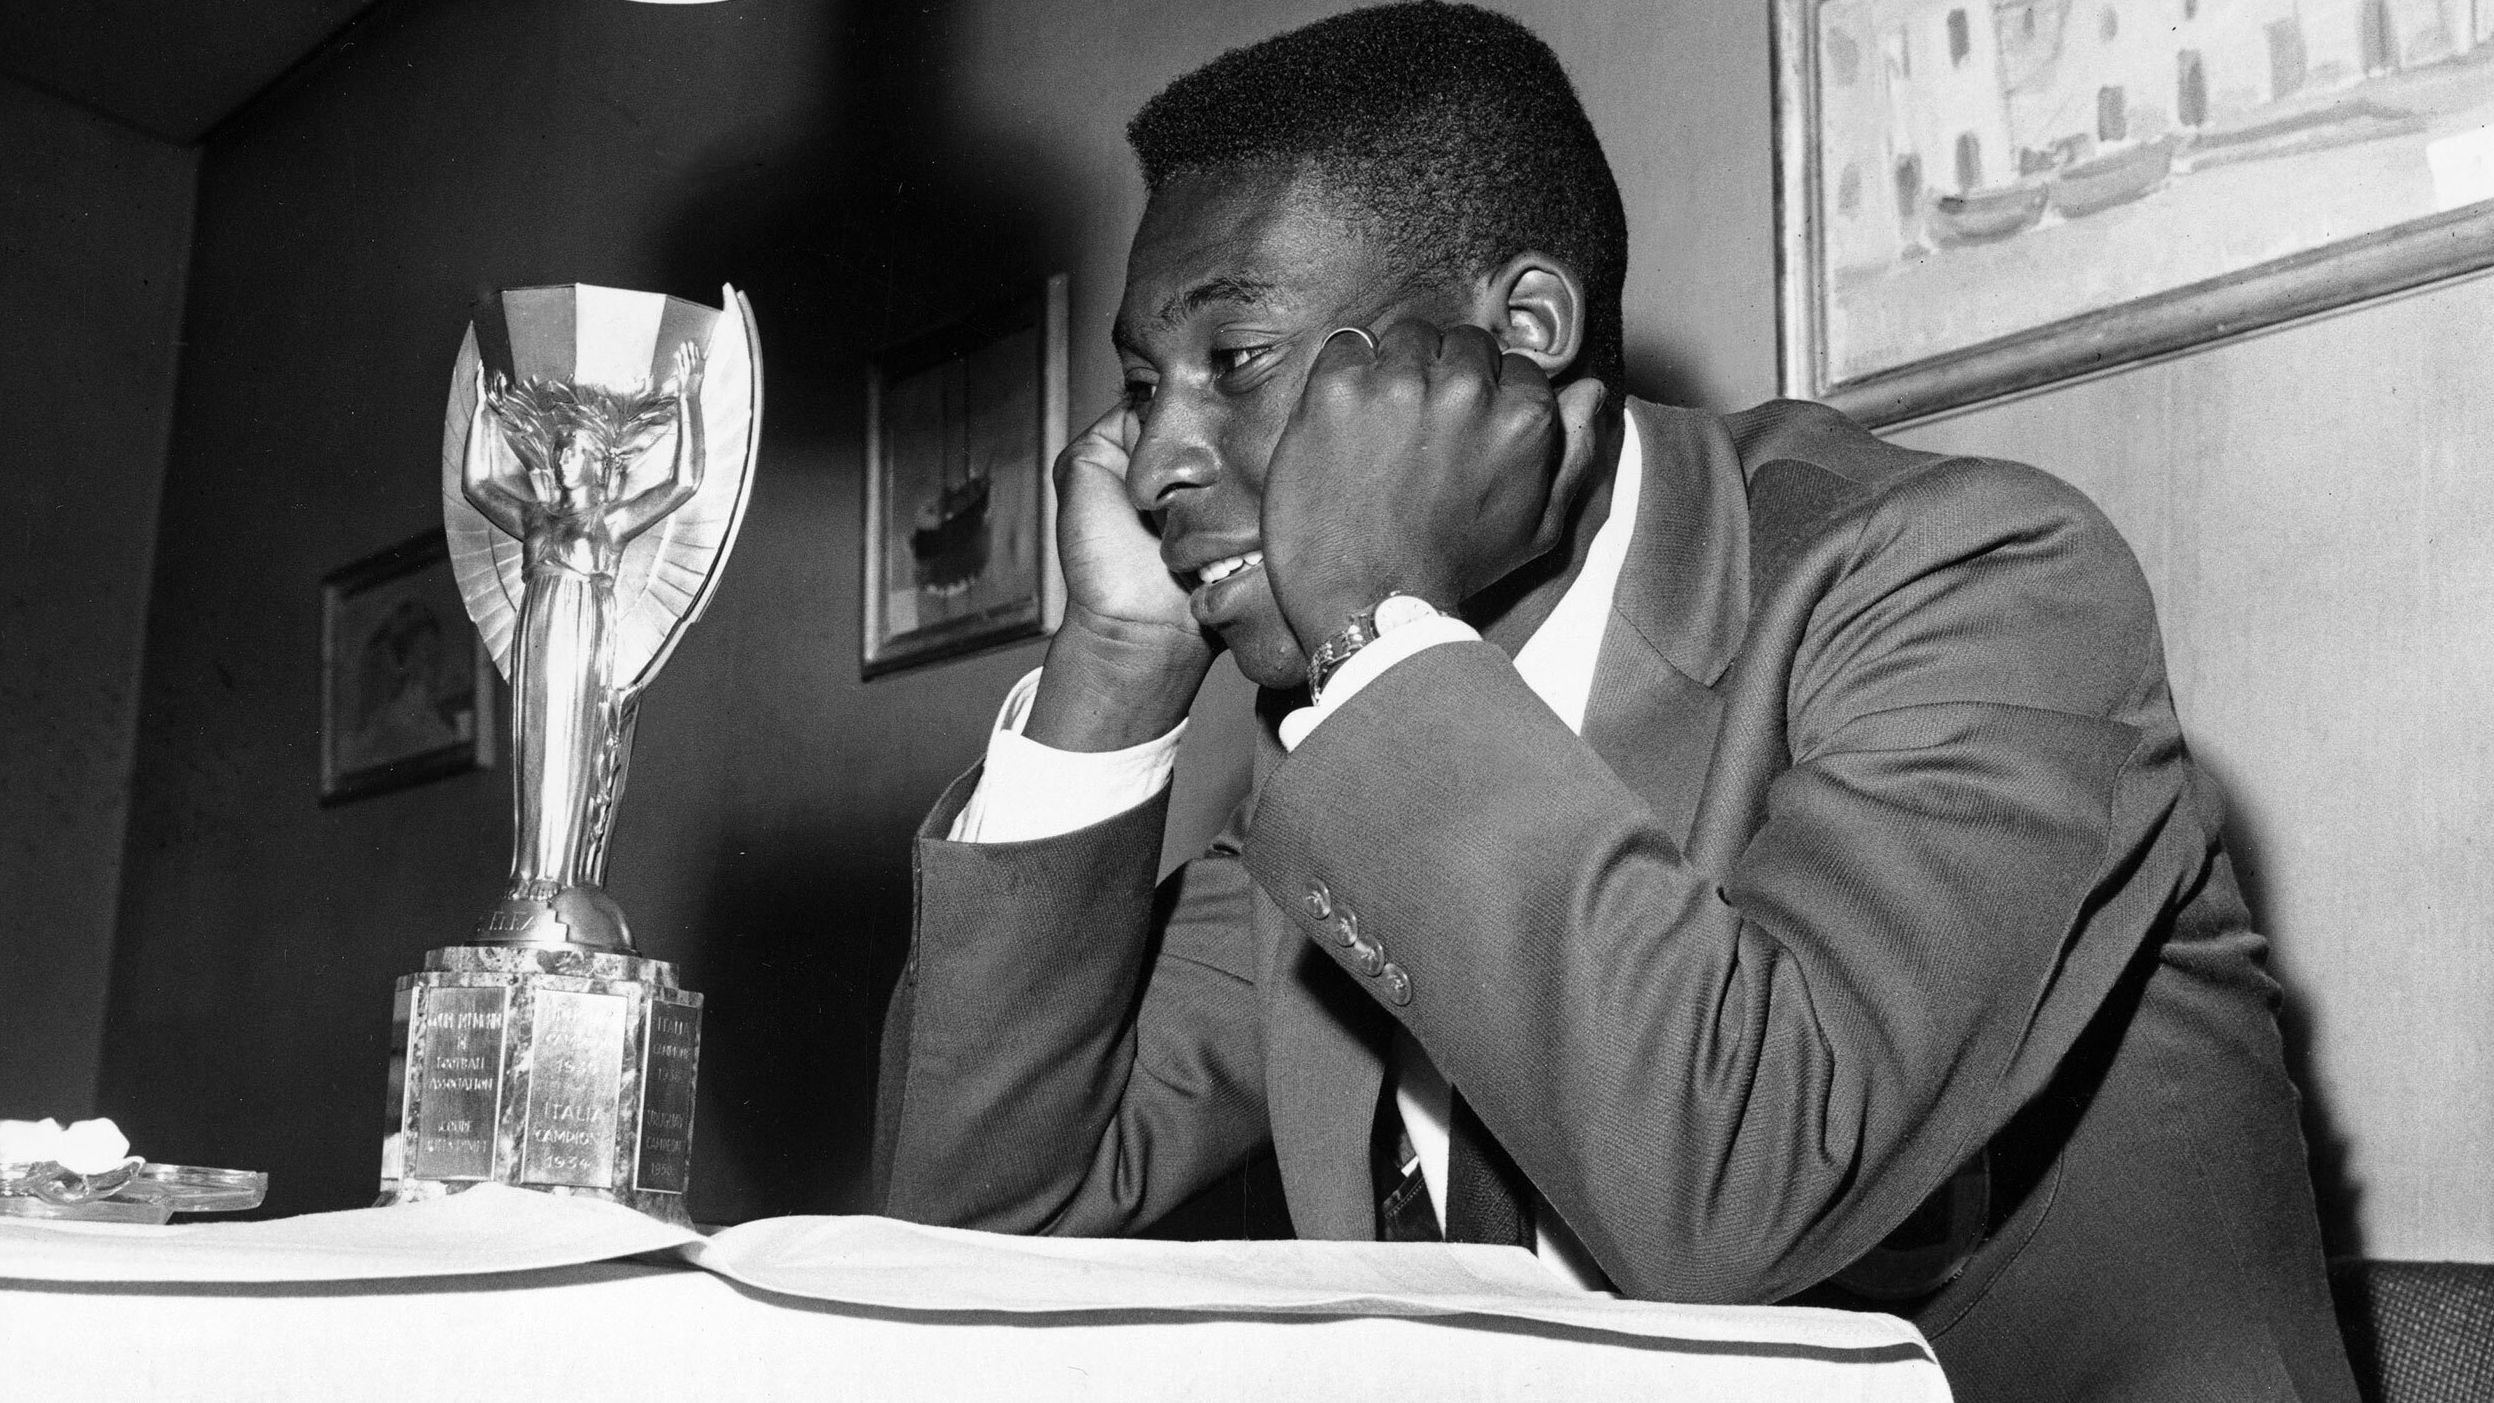 Pelé admires the Jules Rimet Trophy, the prize for winning the World Cup, circa 1958.